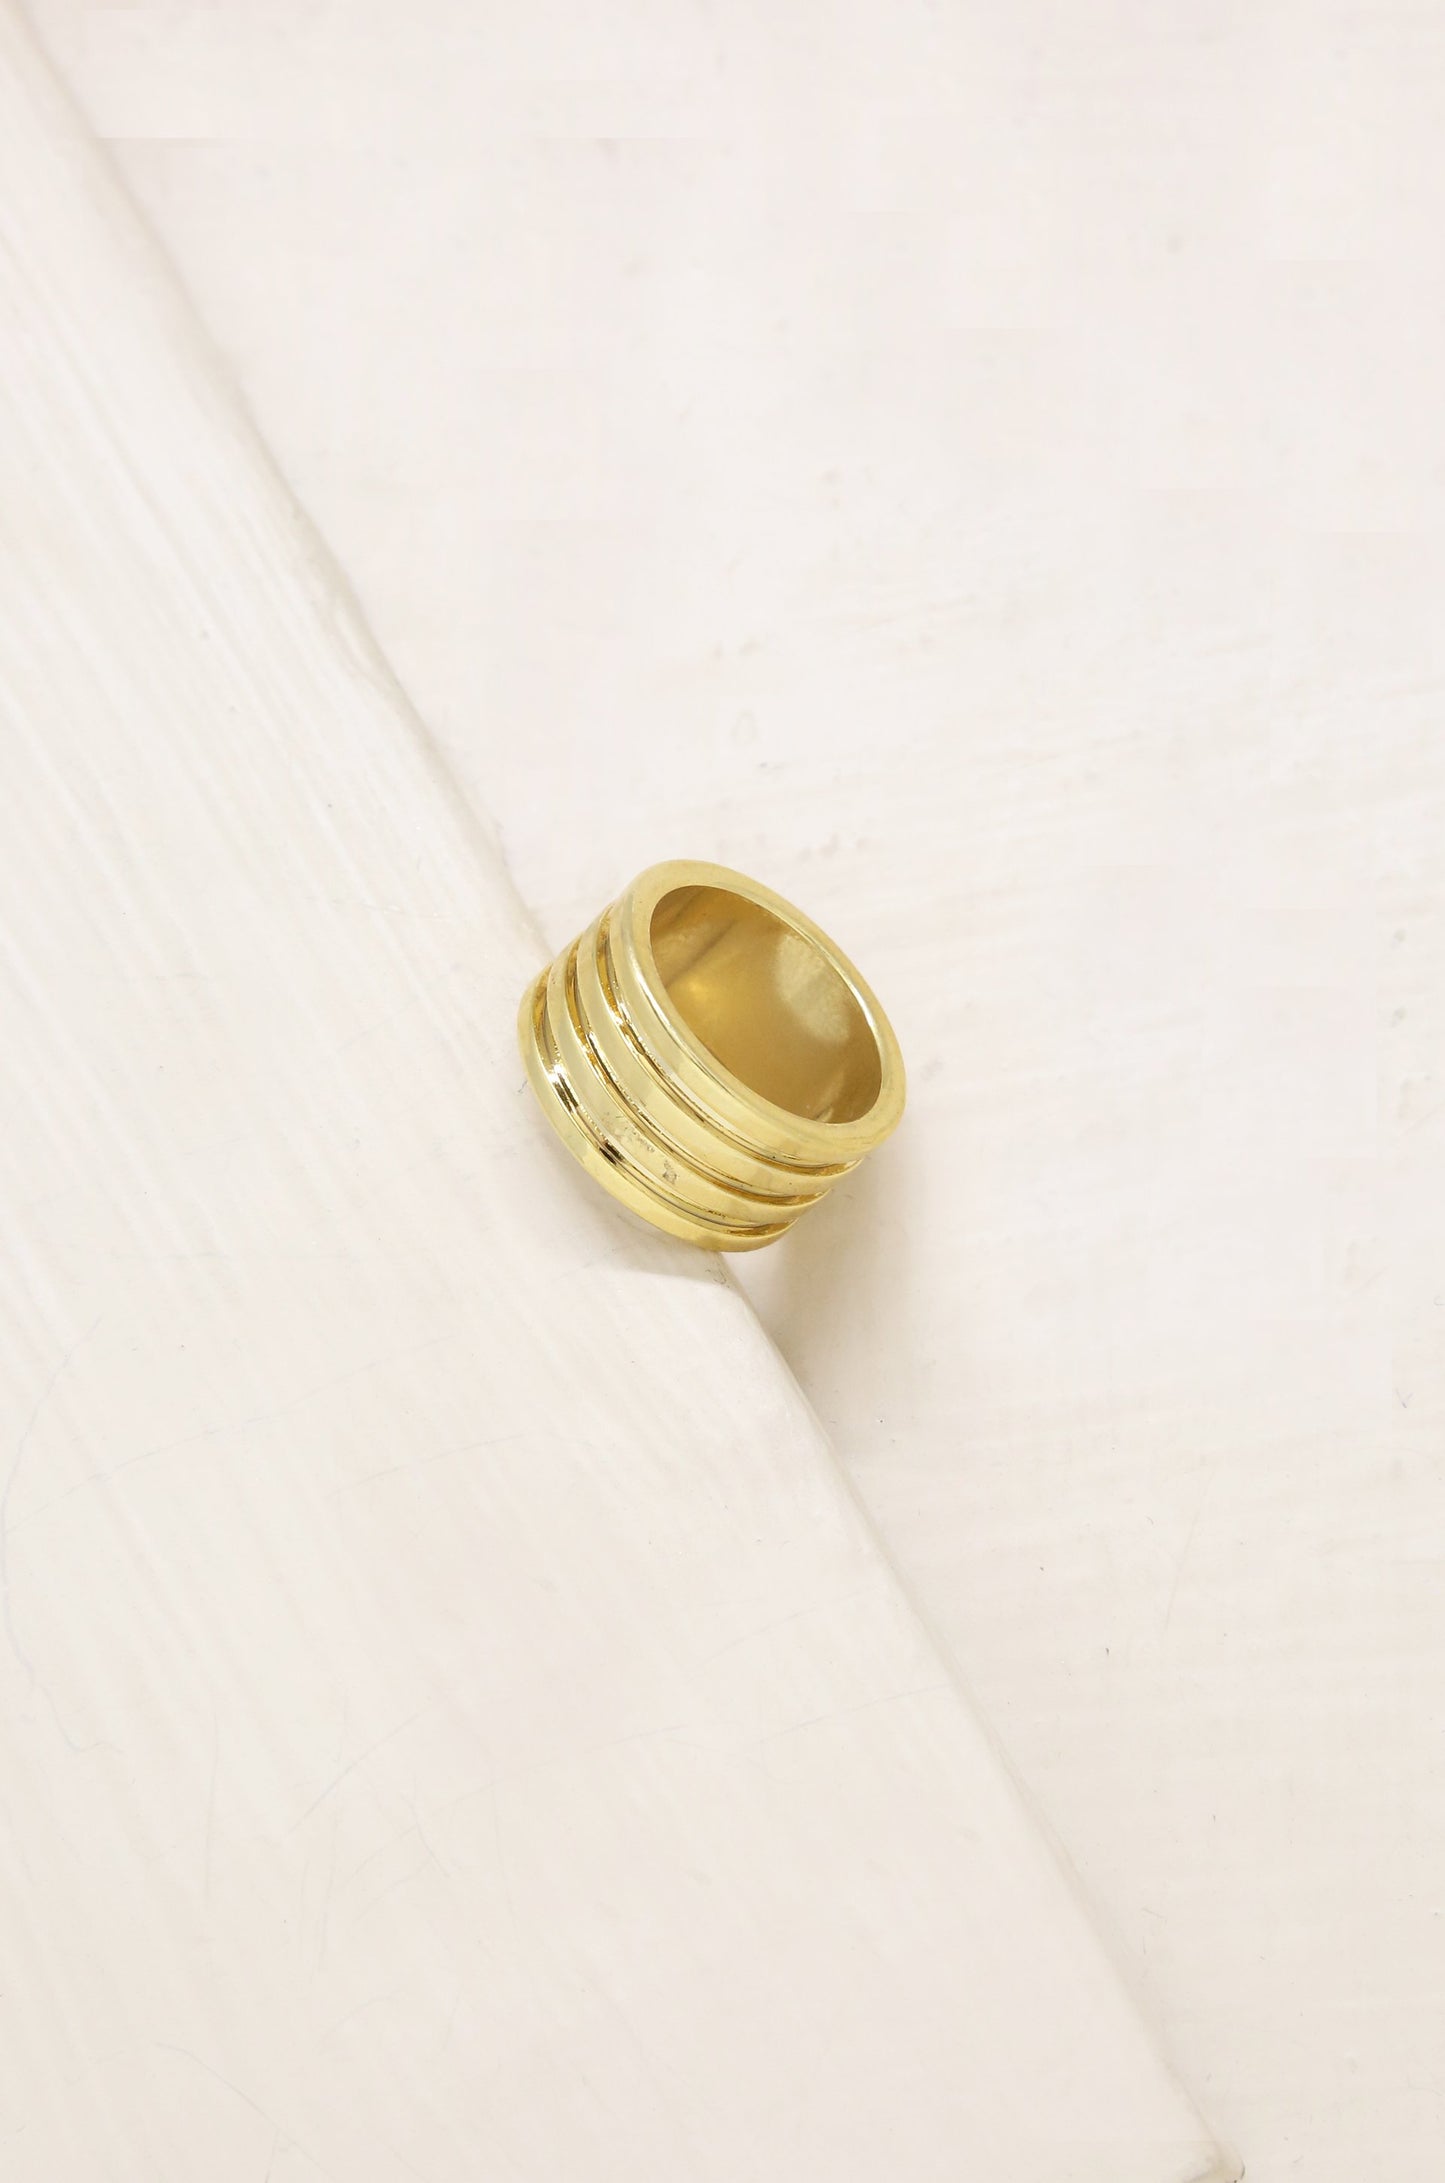 The Only Essential 18k Gold Plated Ring on slate backgroundThe Only Essential 18k Gold Plated Ring on slate background